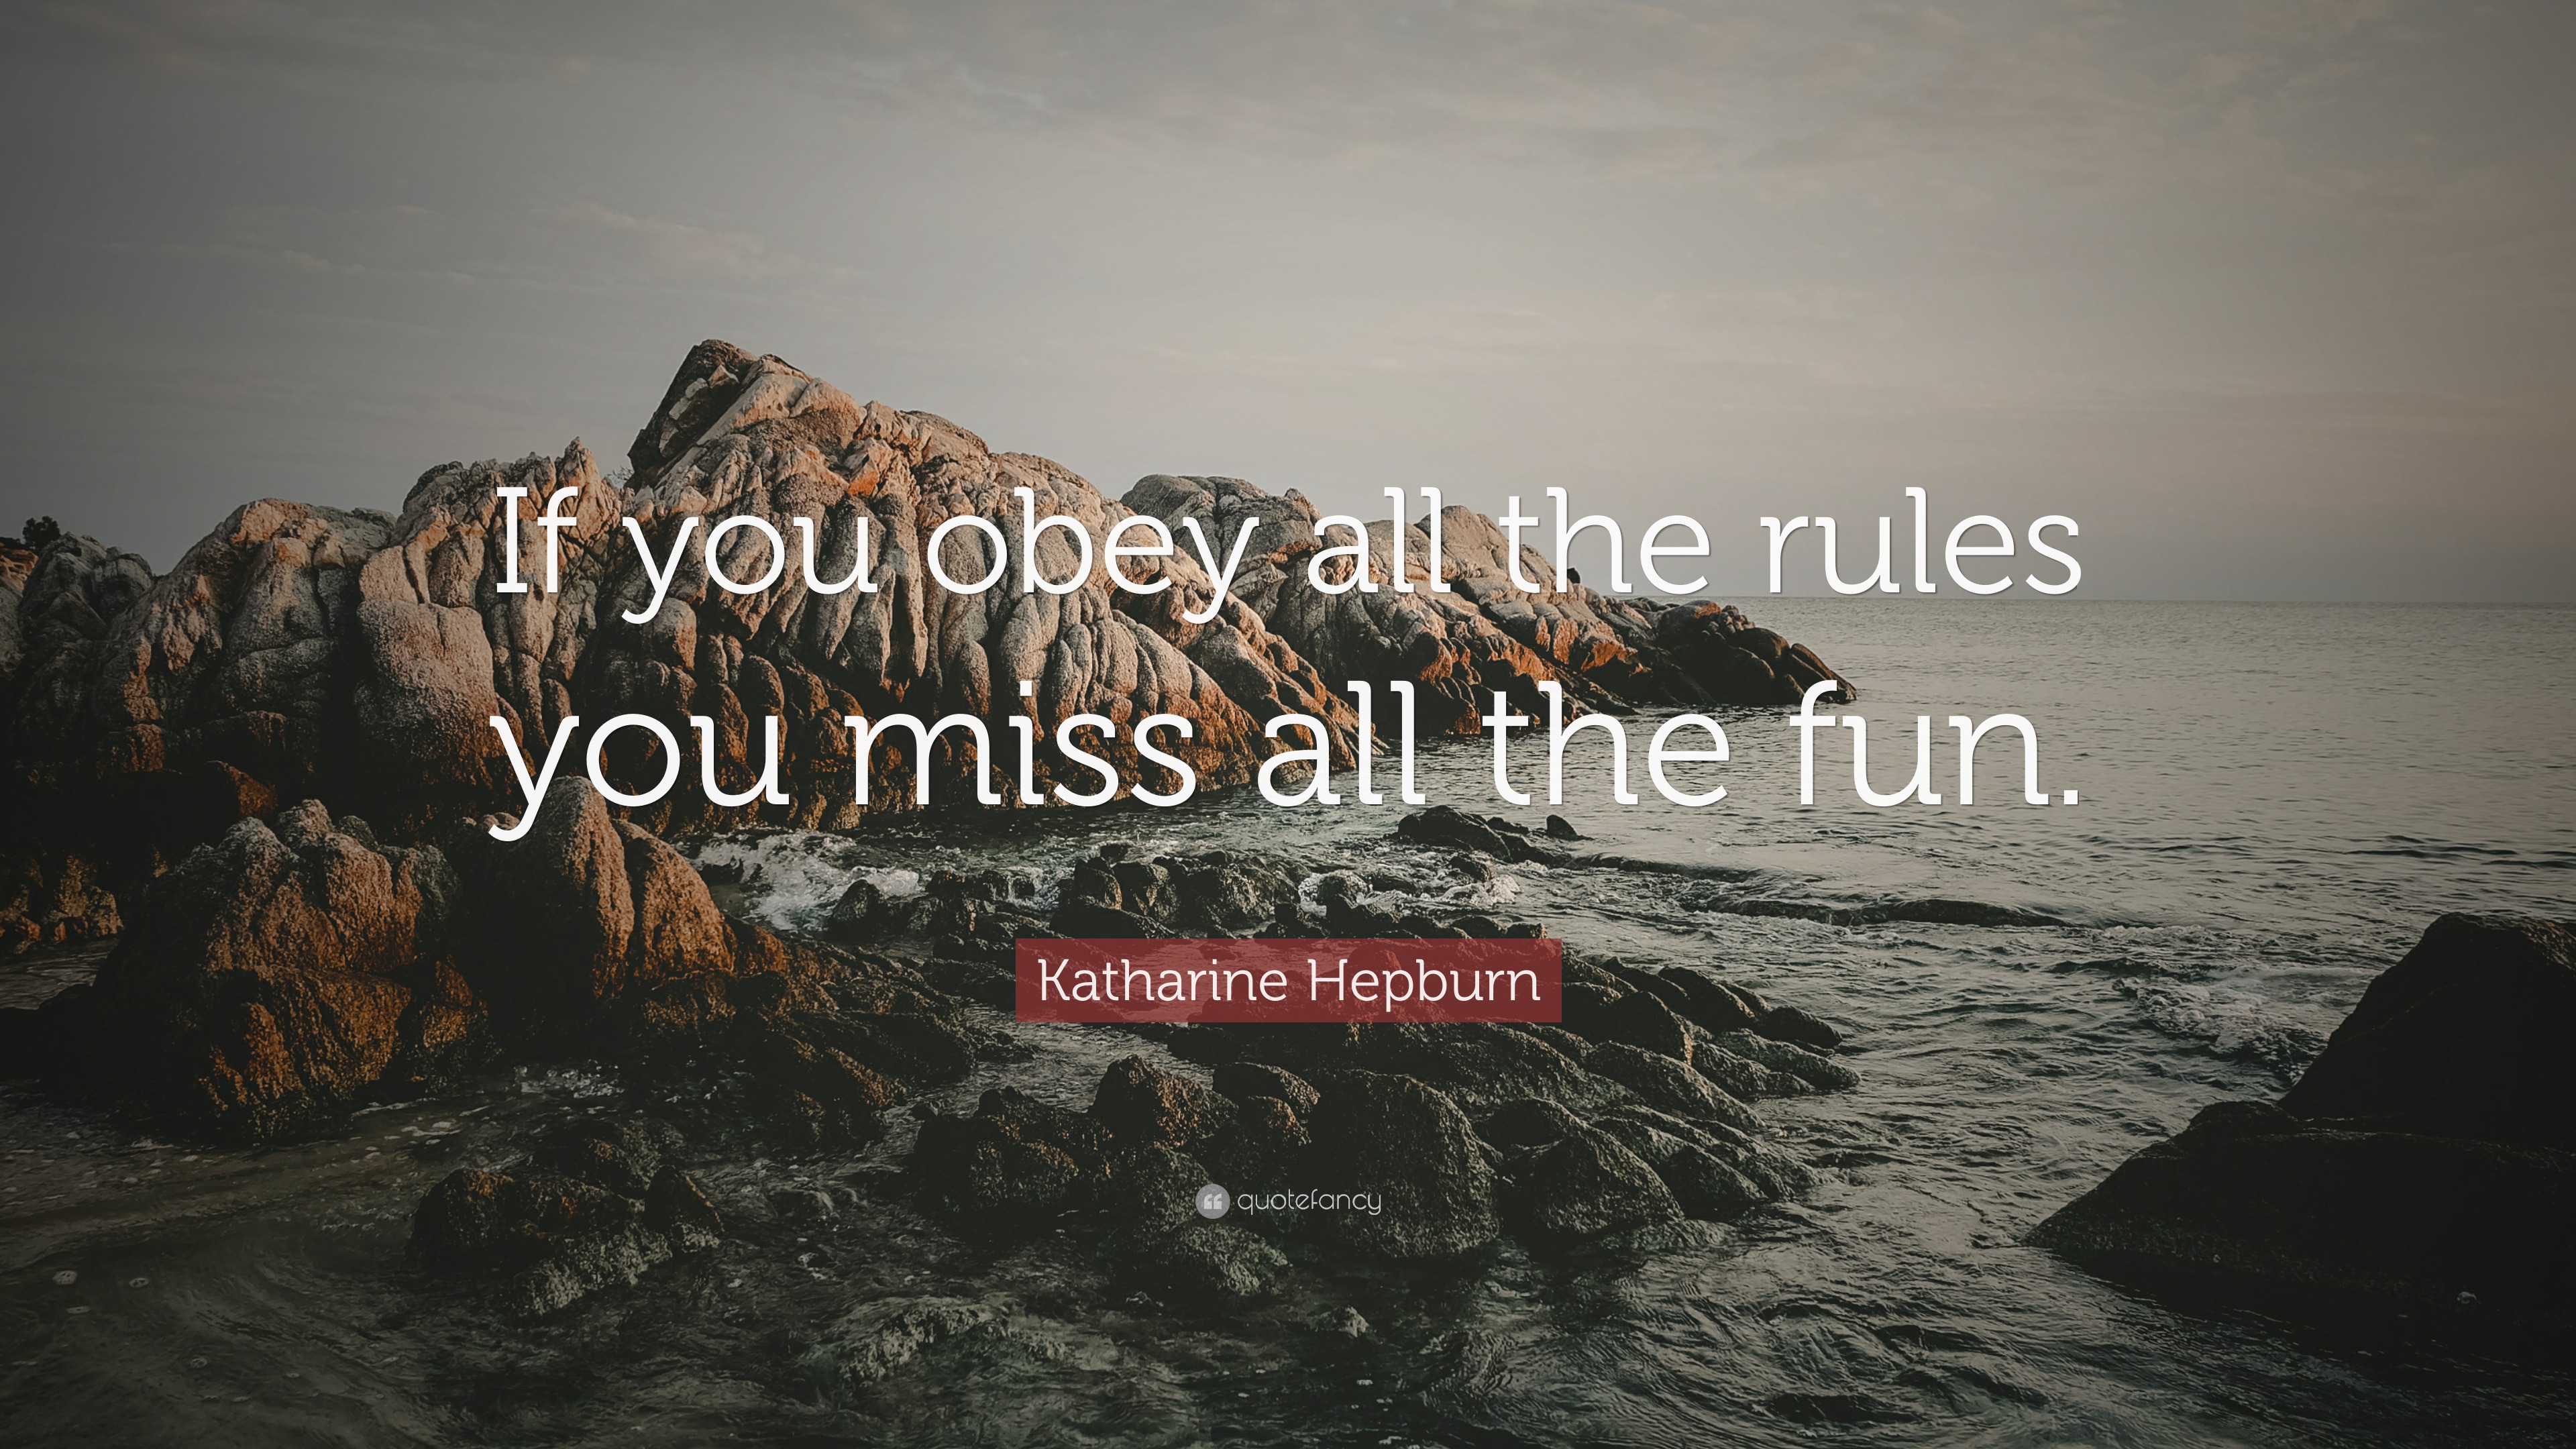 Katharine Hepburn Quote “if You Obey All The Rules You Miss All The Fun”